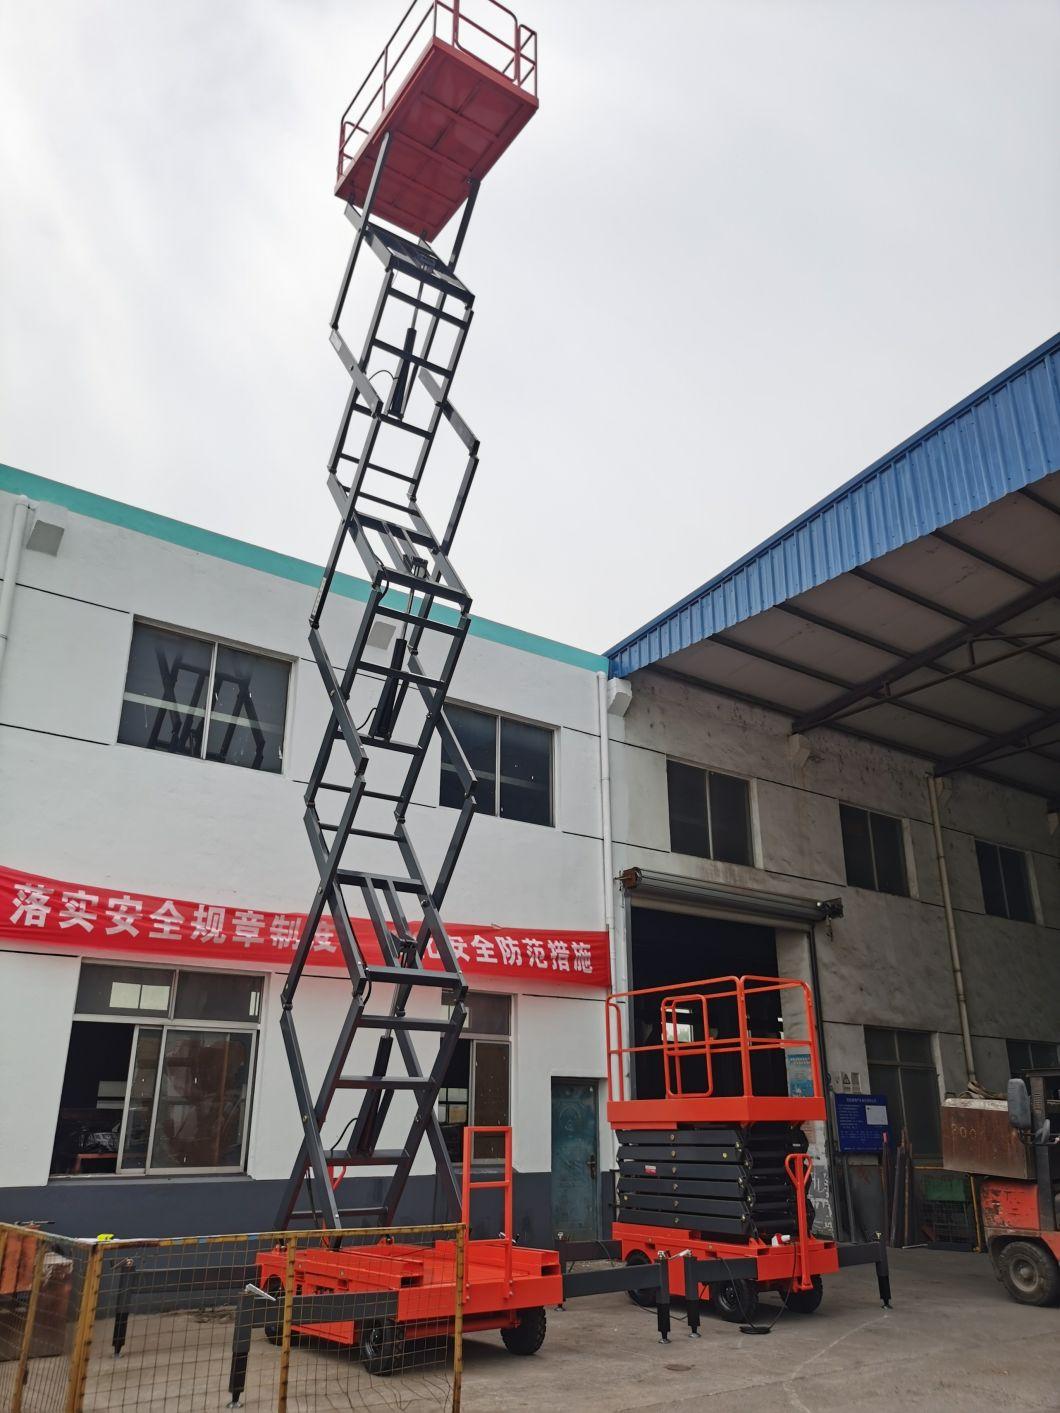 Daxlifter Brand Portable Manual Mobile Scissor Lift with CE